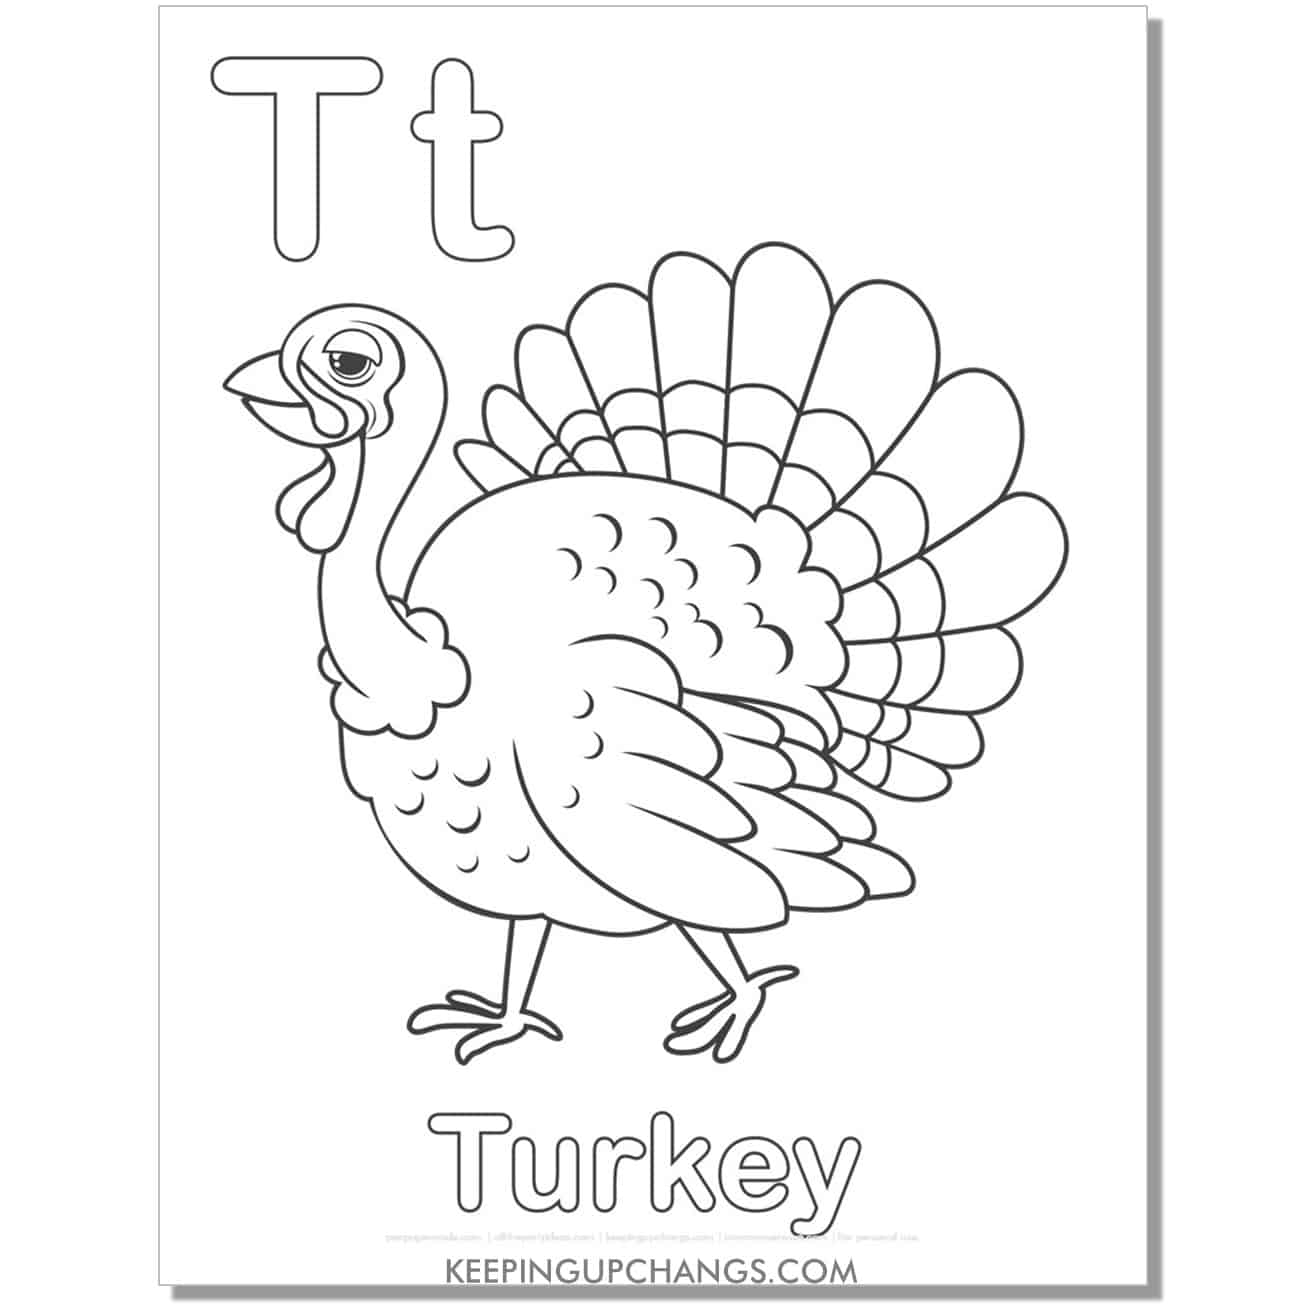 abc coloring sheet, t for turkey.